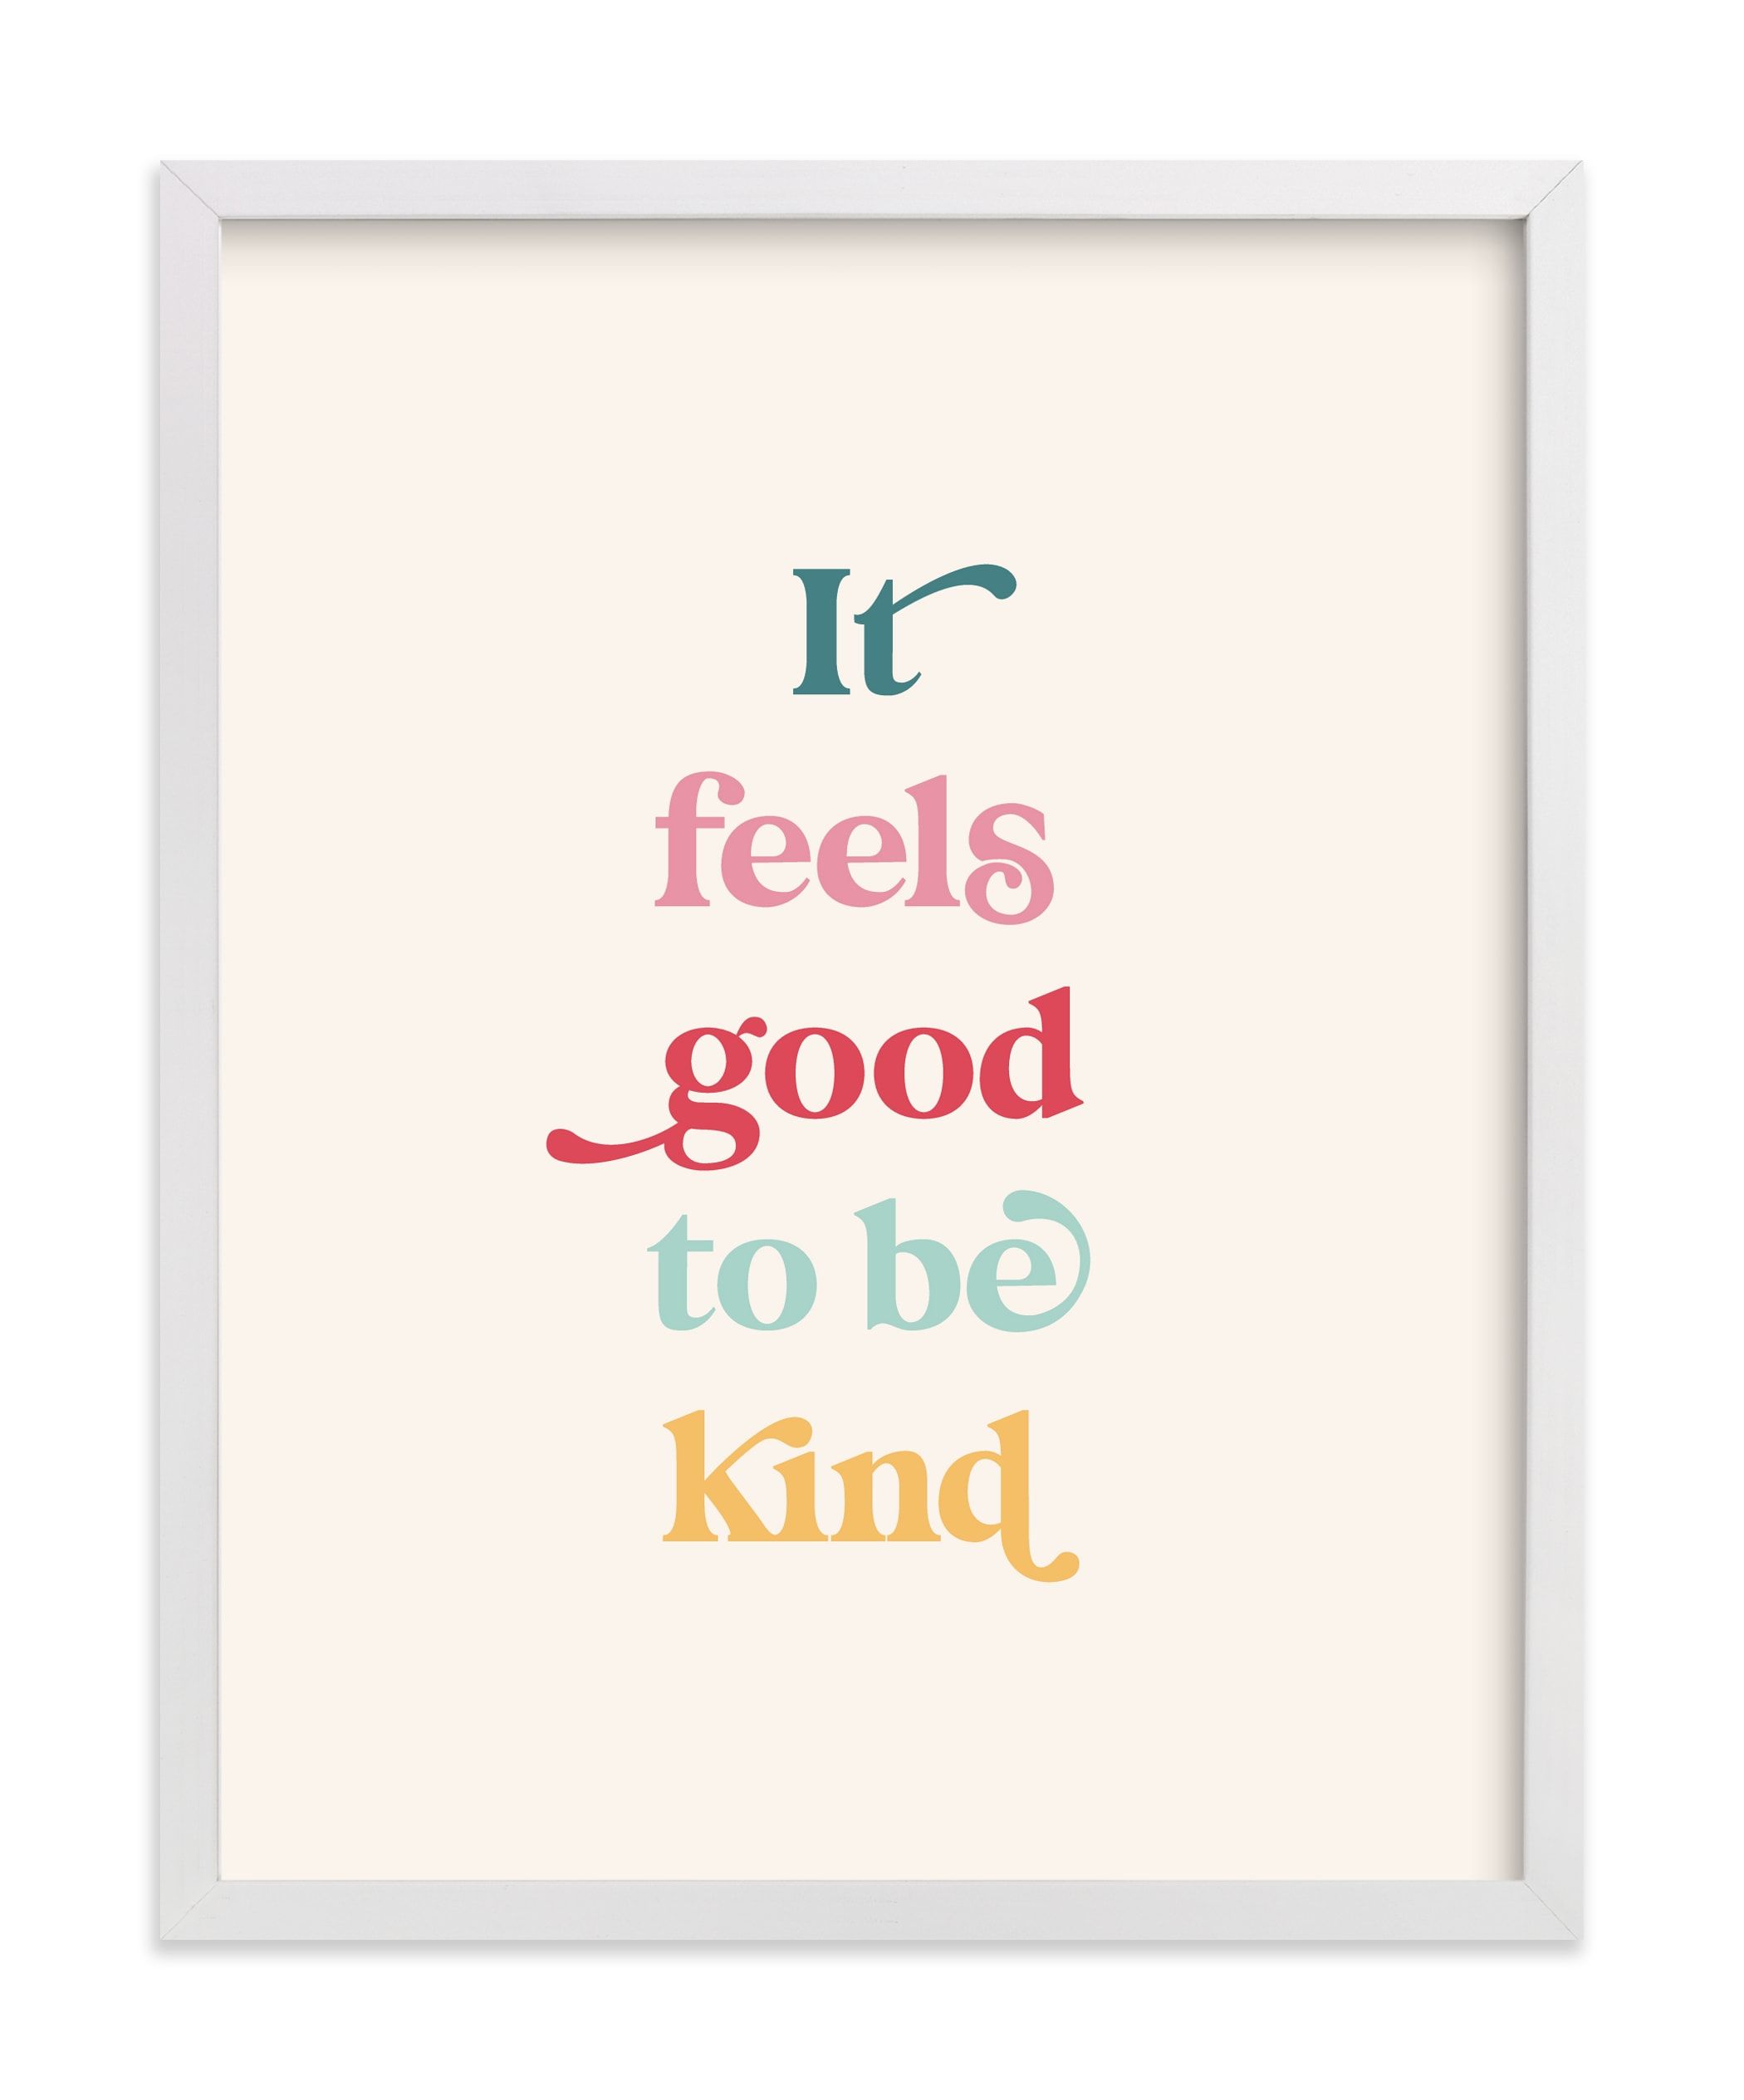 "It feels good to be kind" - Graphic Limited Edition Art Print by Leah Ragain. | Minted